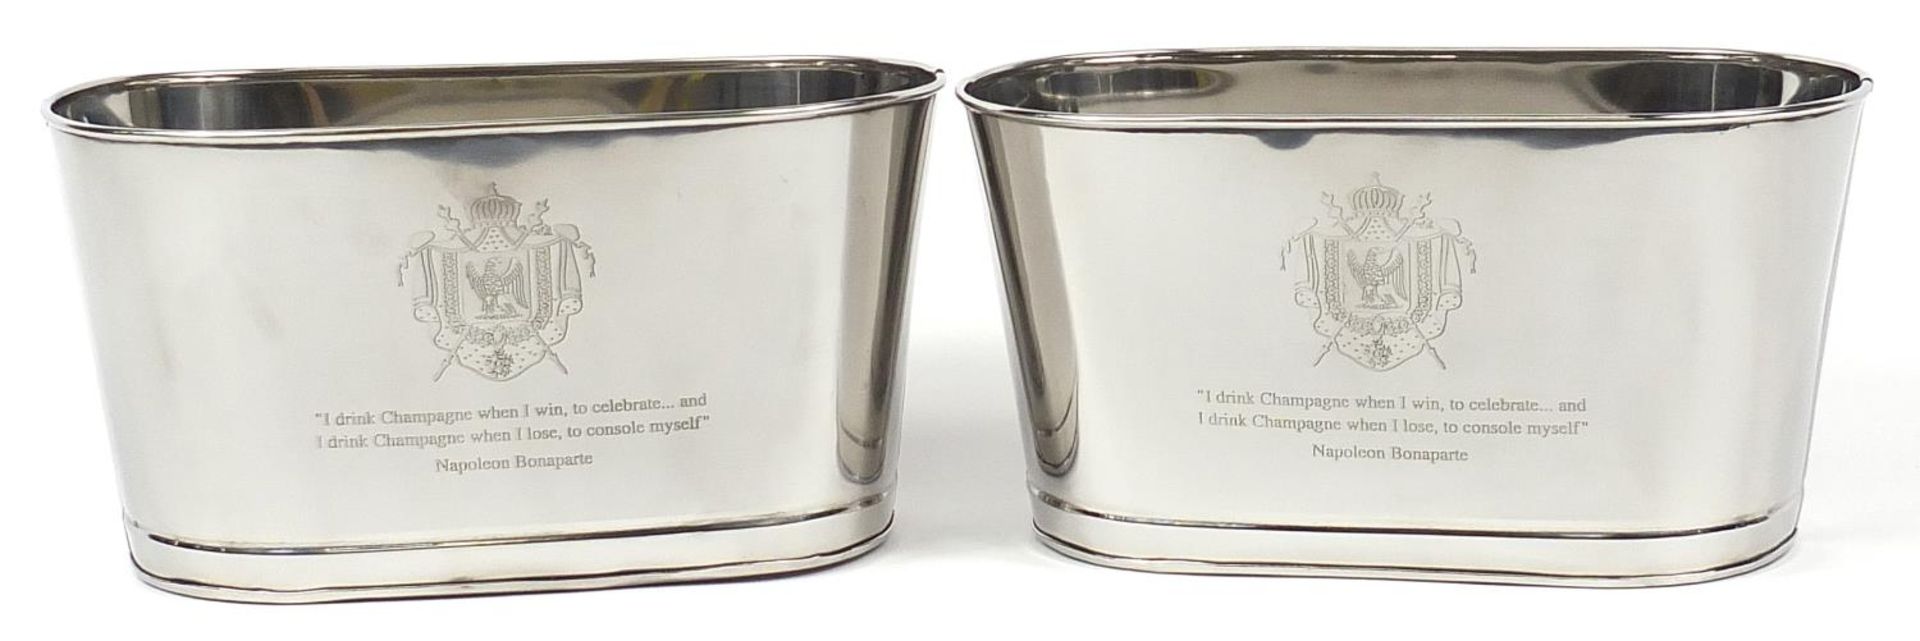 Pair of Champagne buckets with Napoleon Bonaparte and Lily Bollinger mottoes, 18.5cm H x 35cm W x